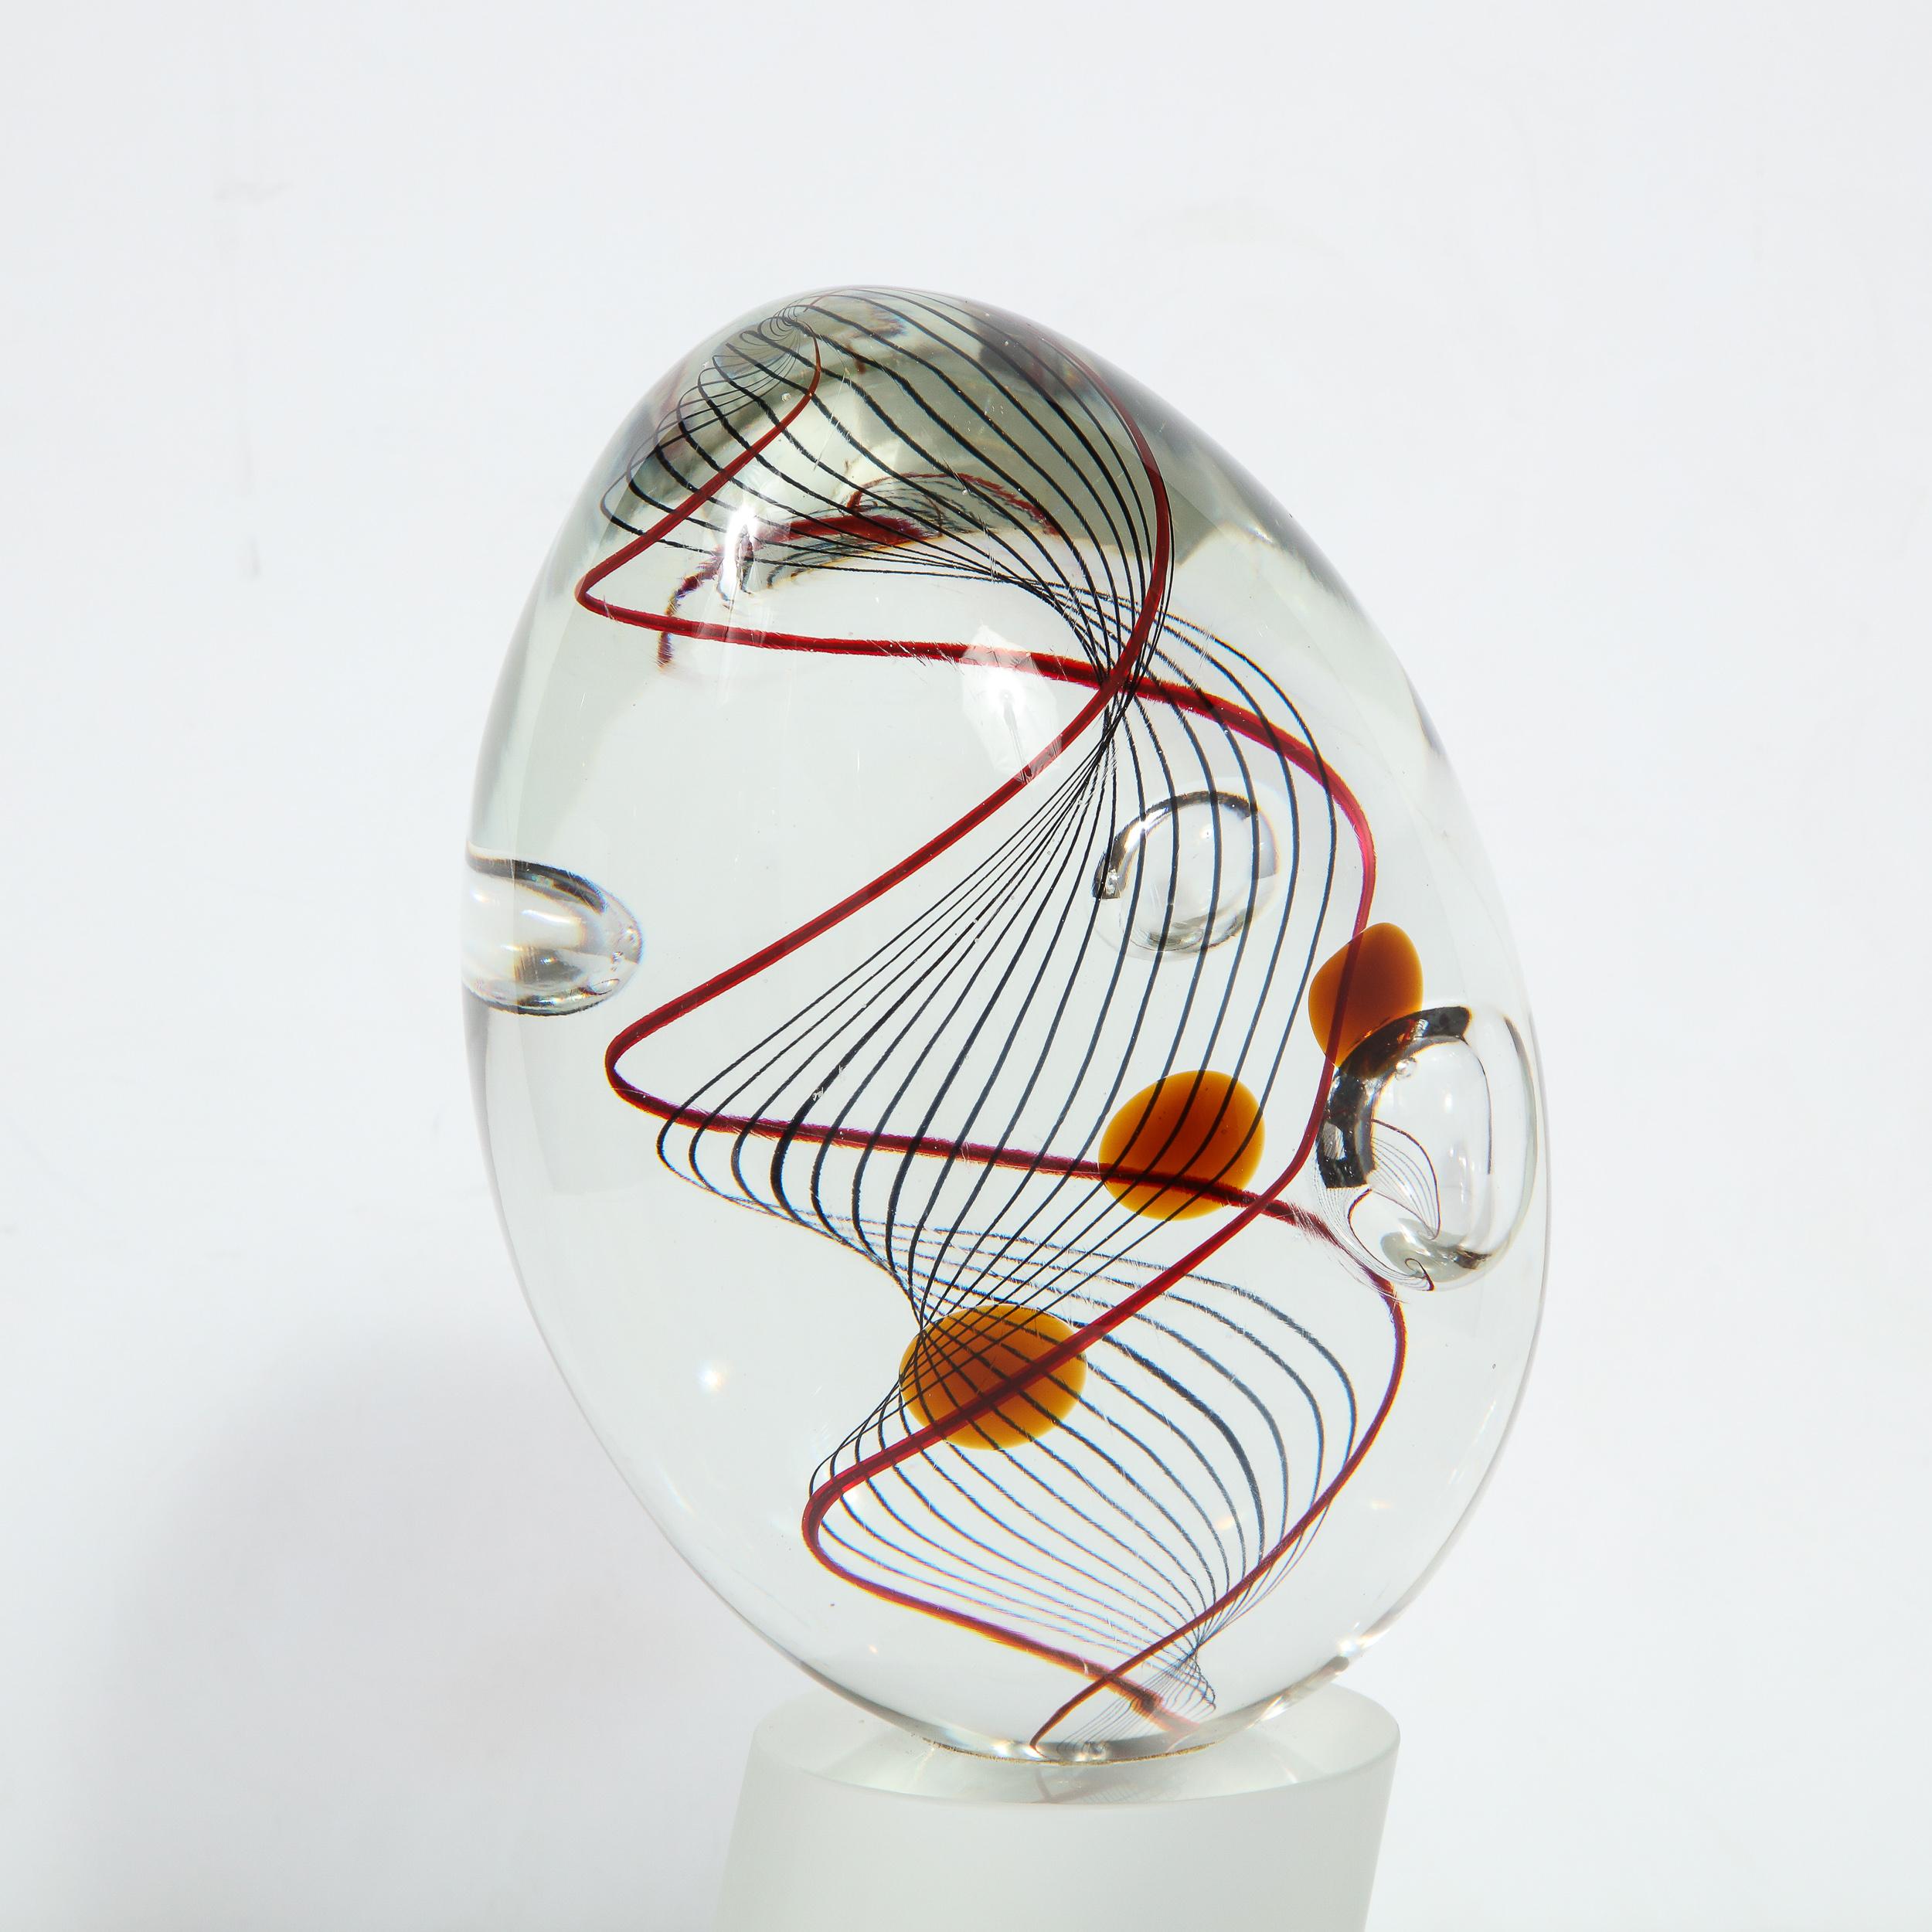 Late 20th Century Mid-Century Modern Murano Translucent & Frosted Glass Sculpture Signed Seguso